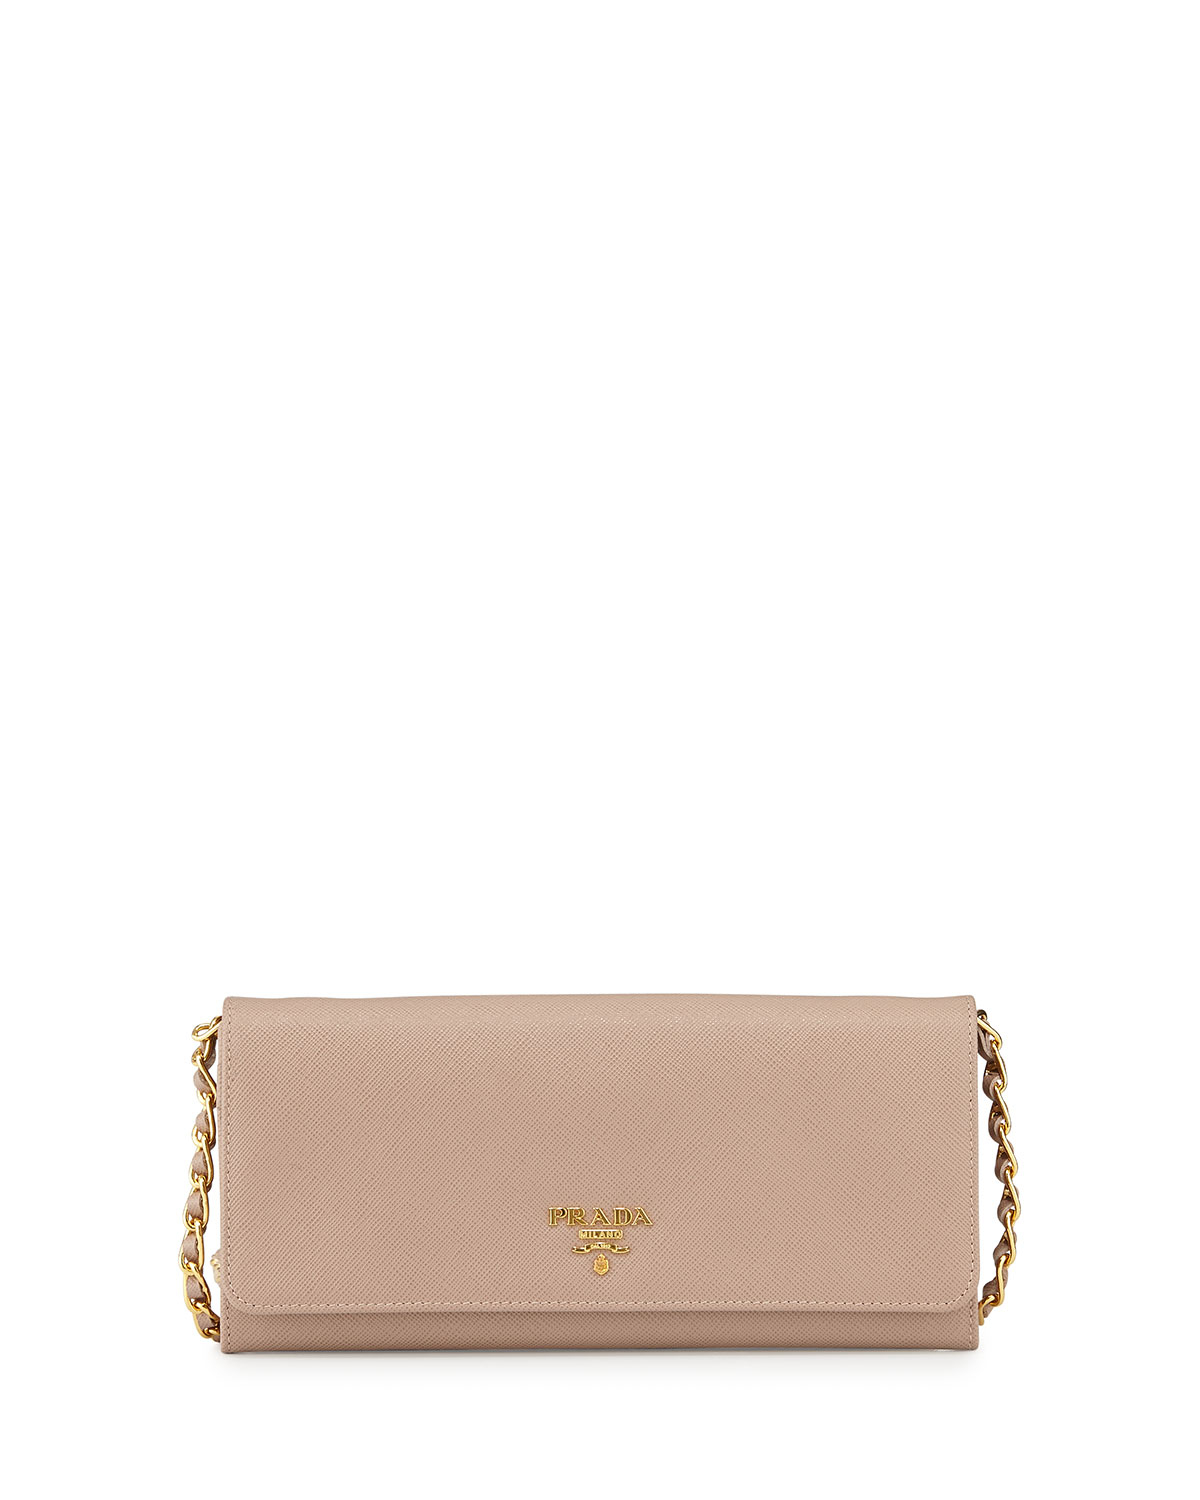 Prada Saffiano Leather Wallet-on-chain in Gray | Lyst  